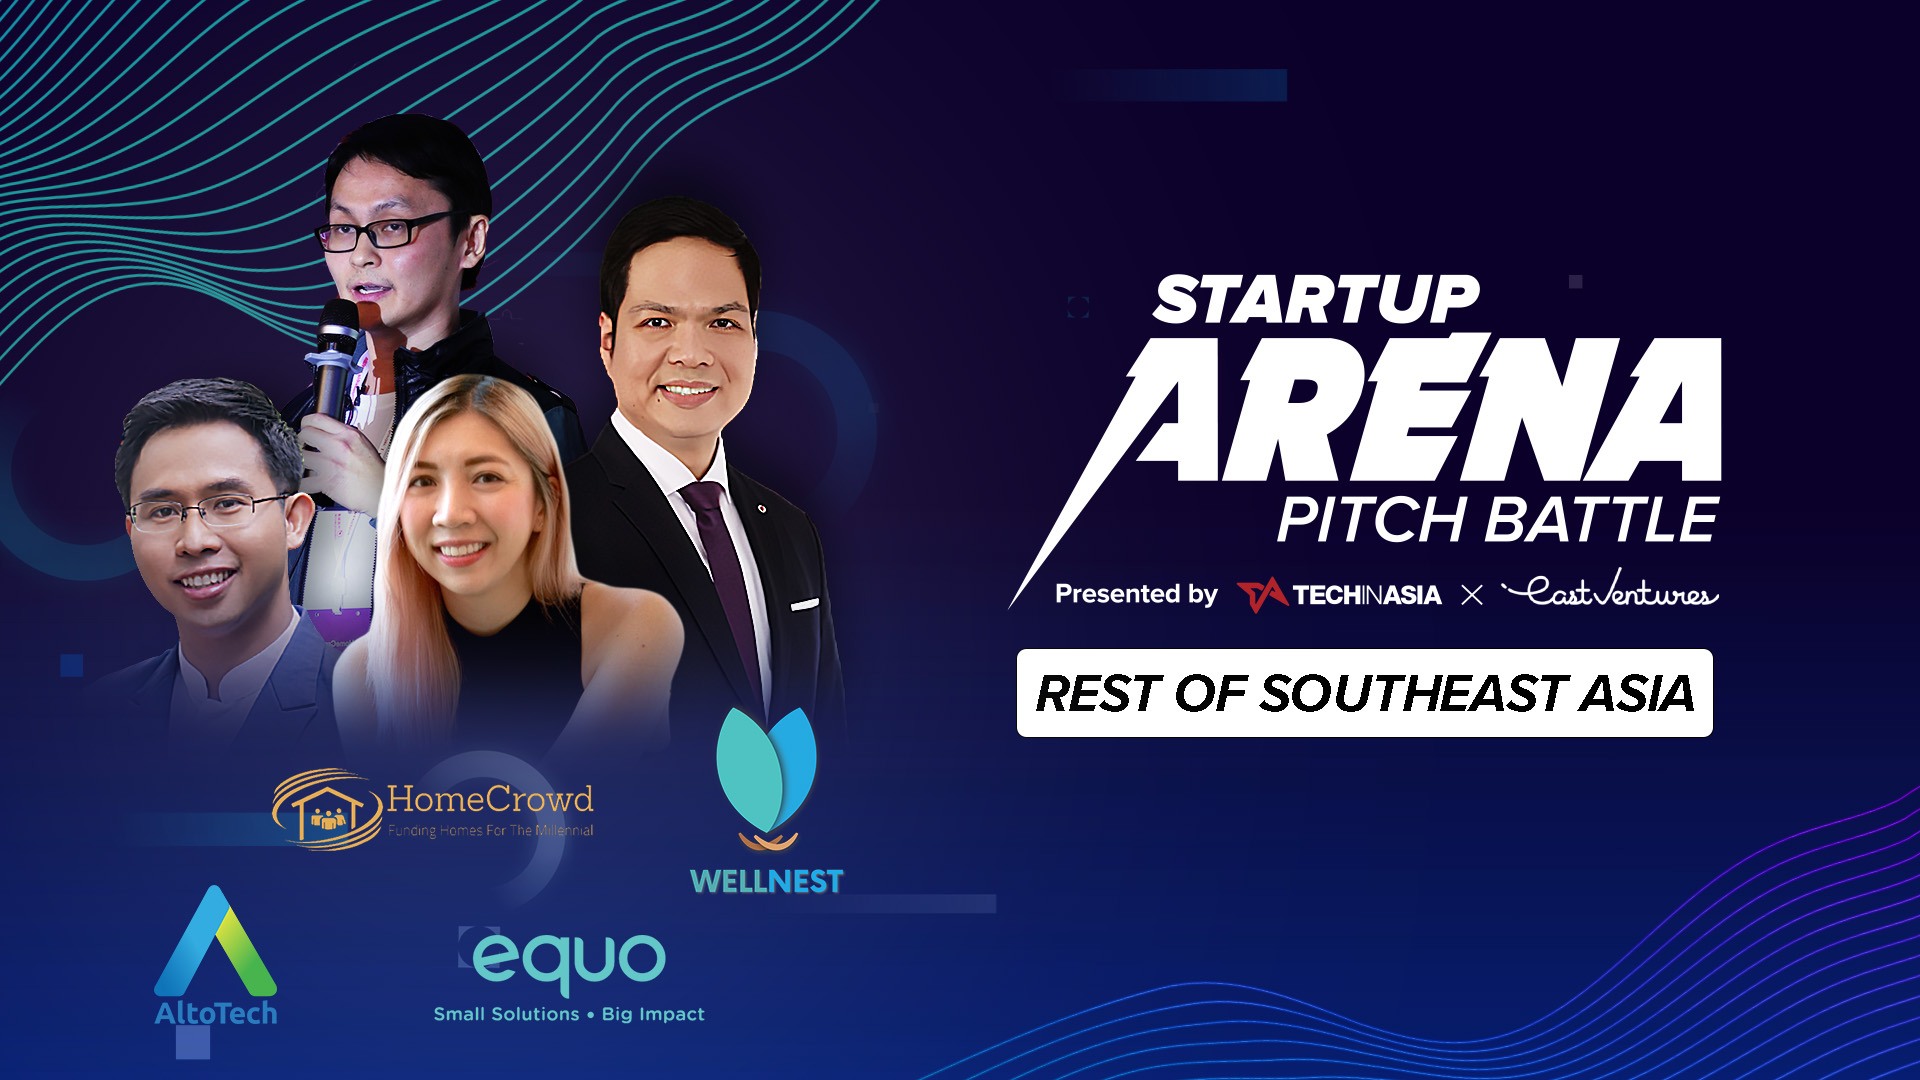 Equo and Altotech to pitch at finals of Startup Arena Pitch Battle 2021 thumbnail